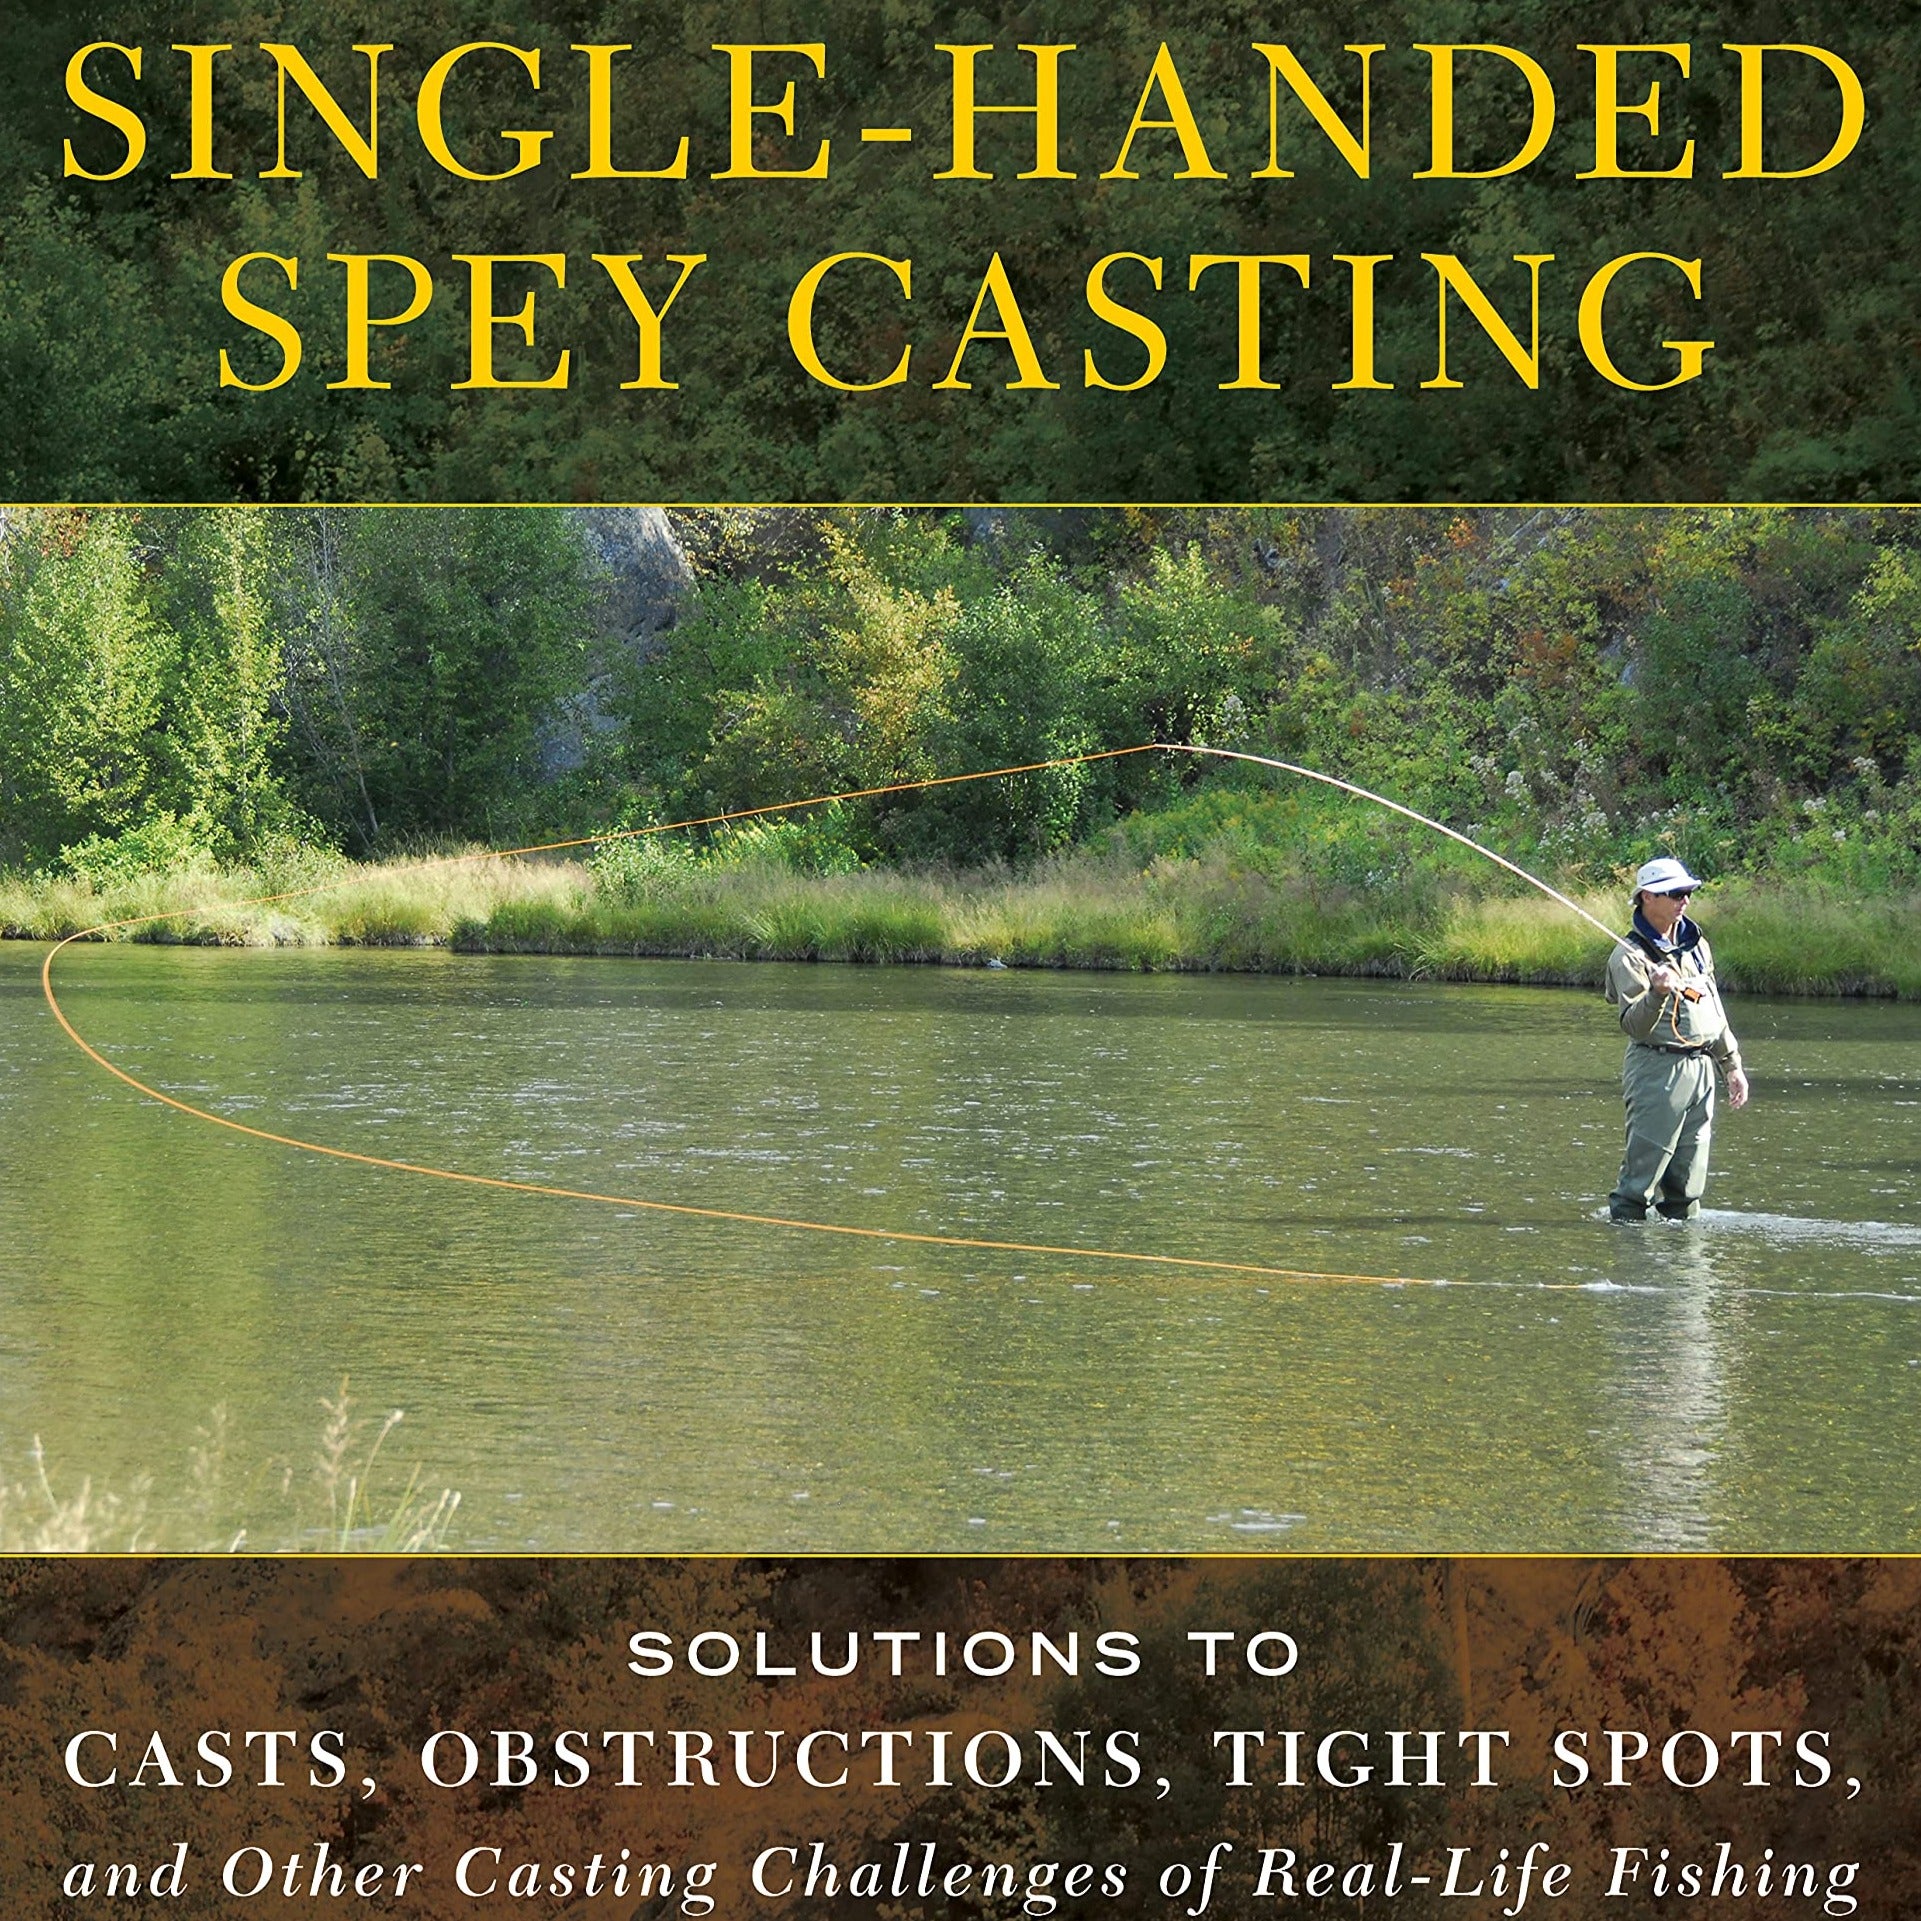 Fly Casting Techniques